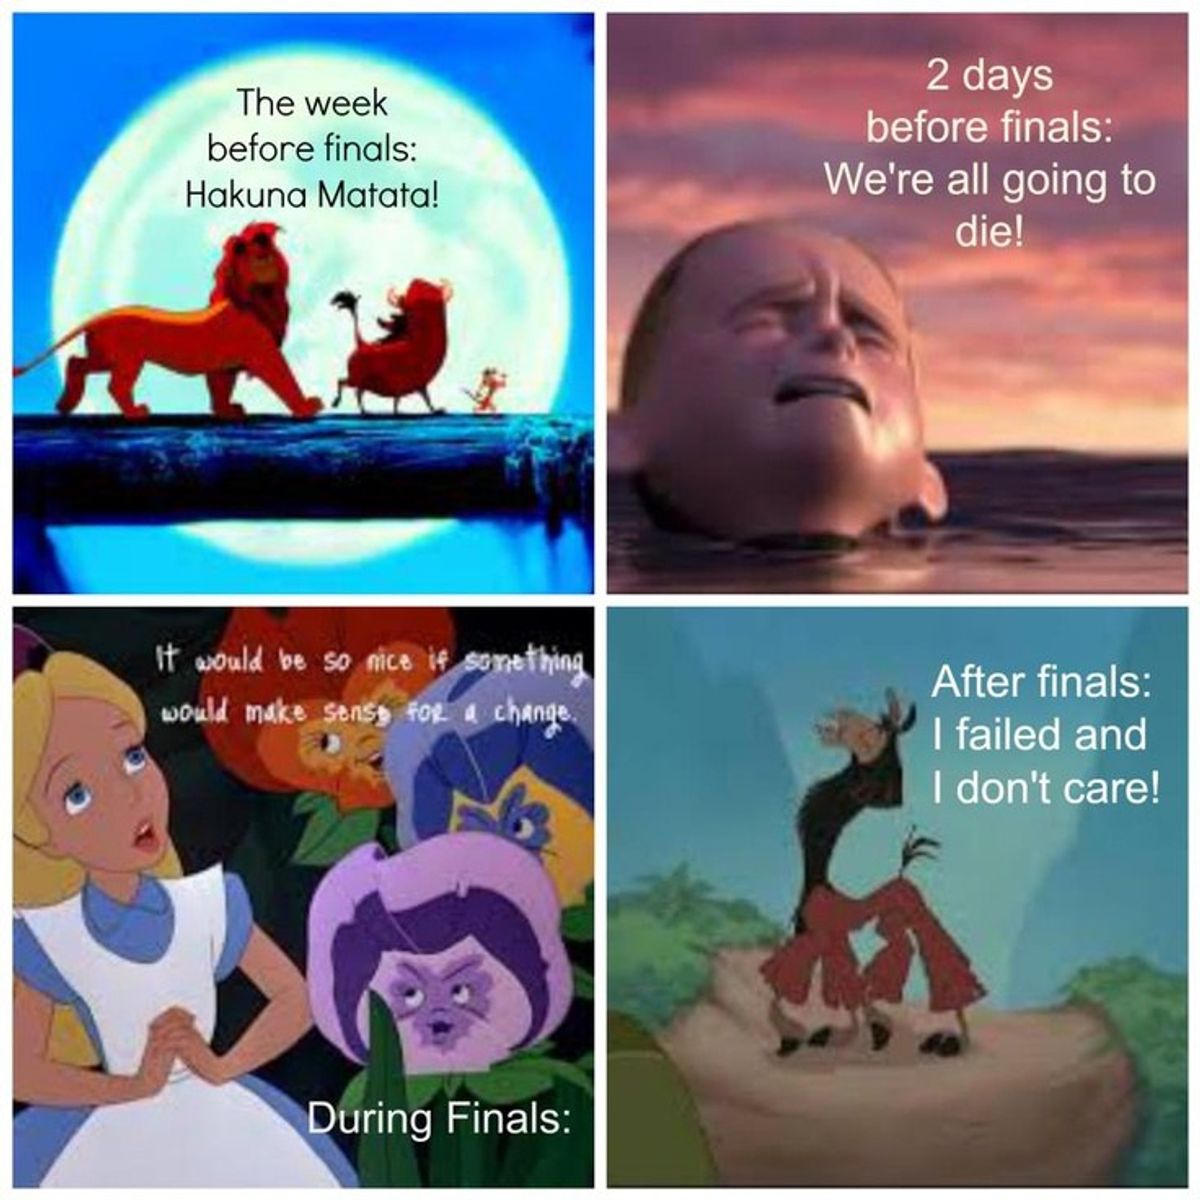 5 Things to Remember During Finals Week As Told By Disney Characters